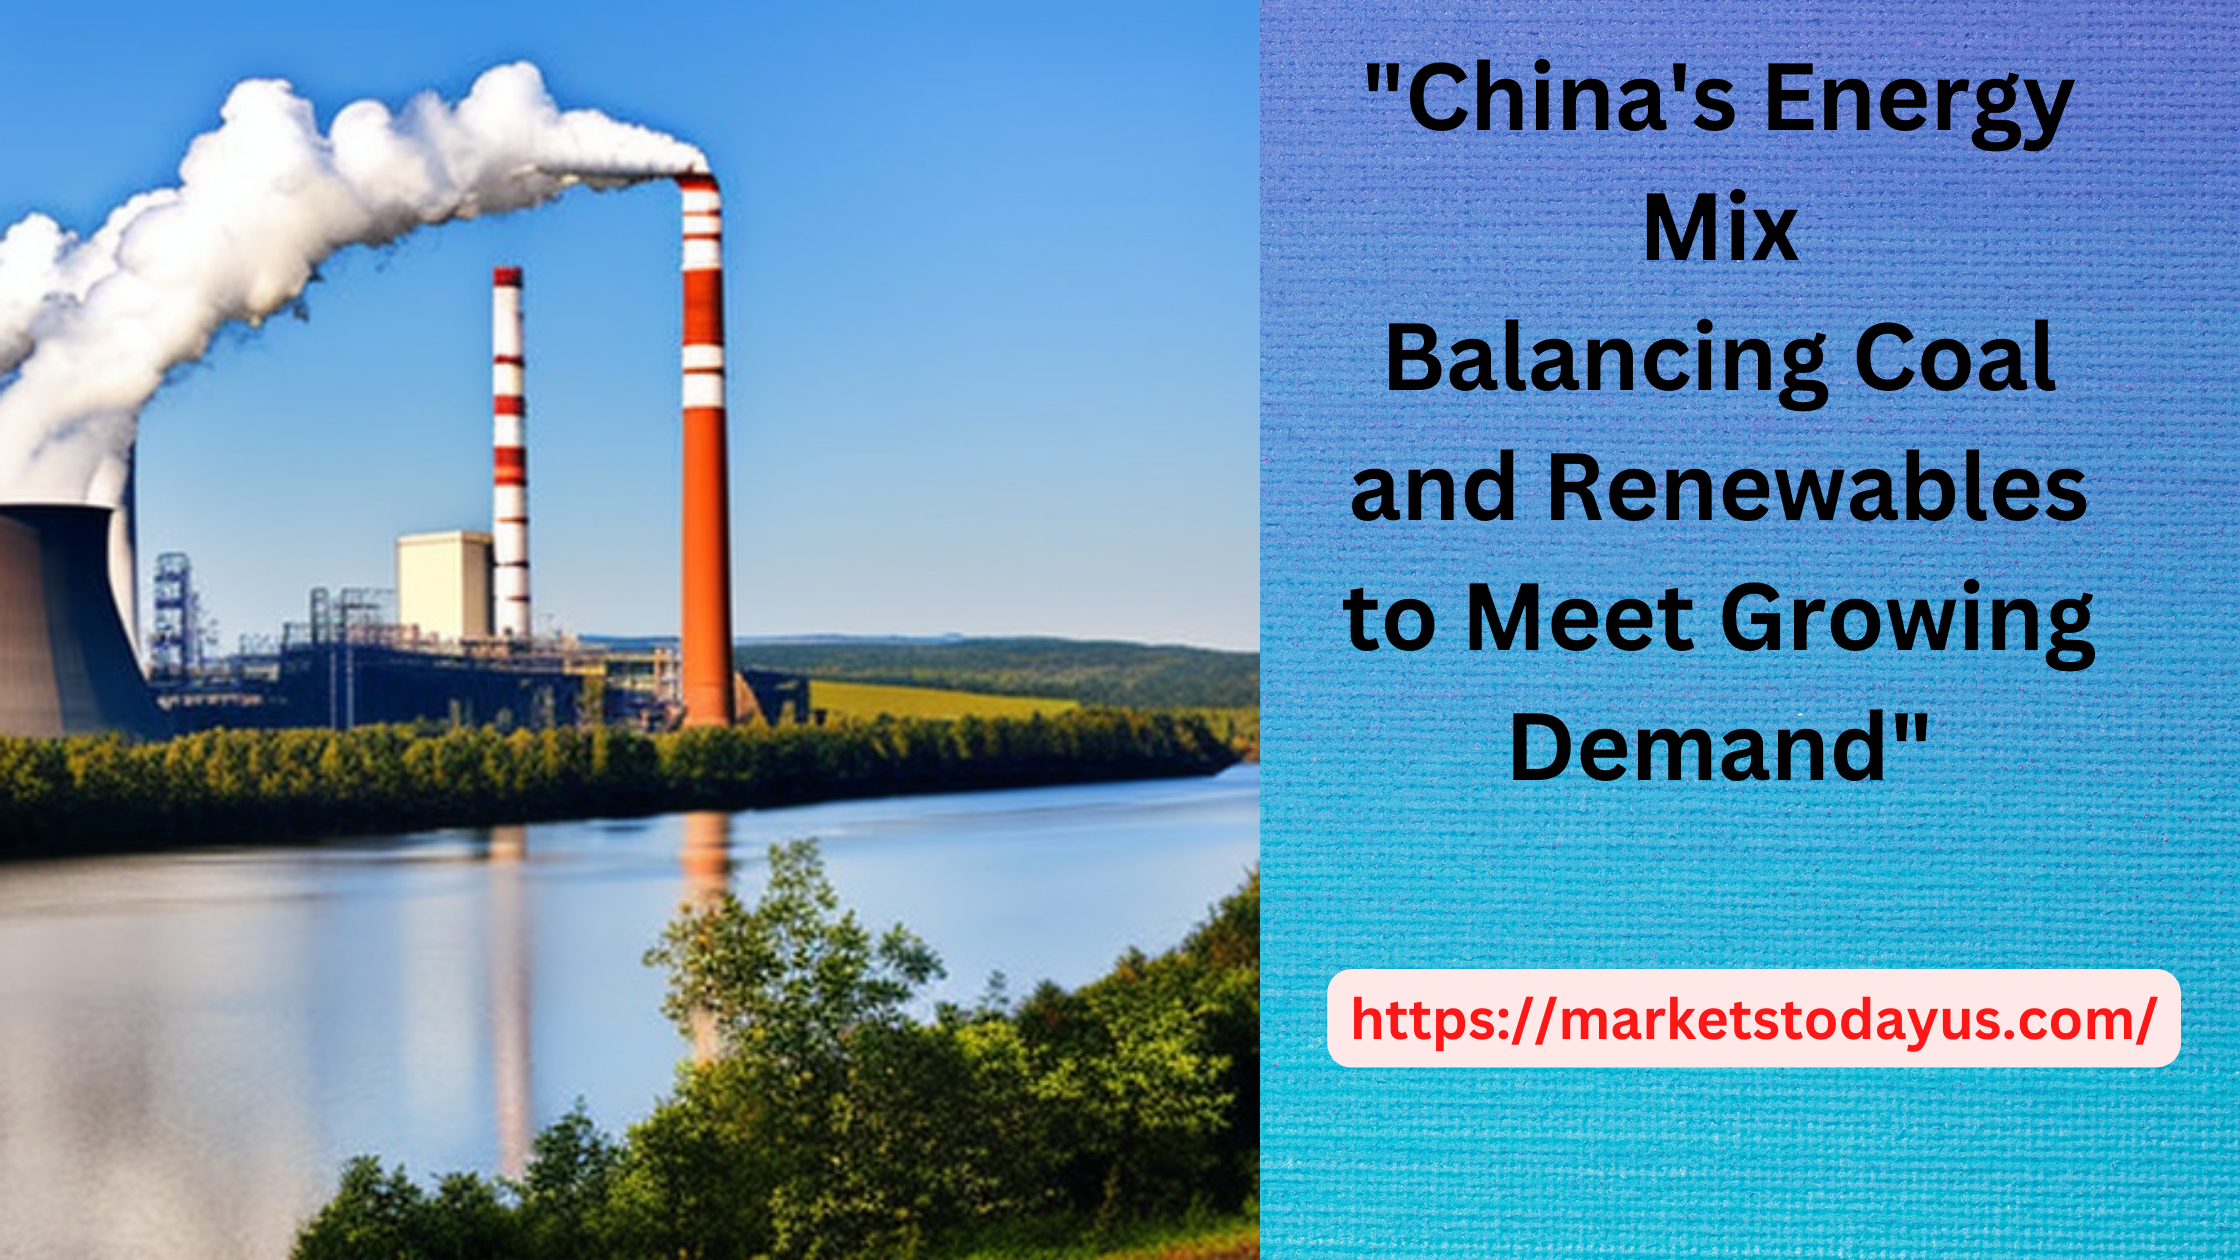 A poem about balancing economic growth and environmental protection through the use of coal and renewable energy sources in China.